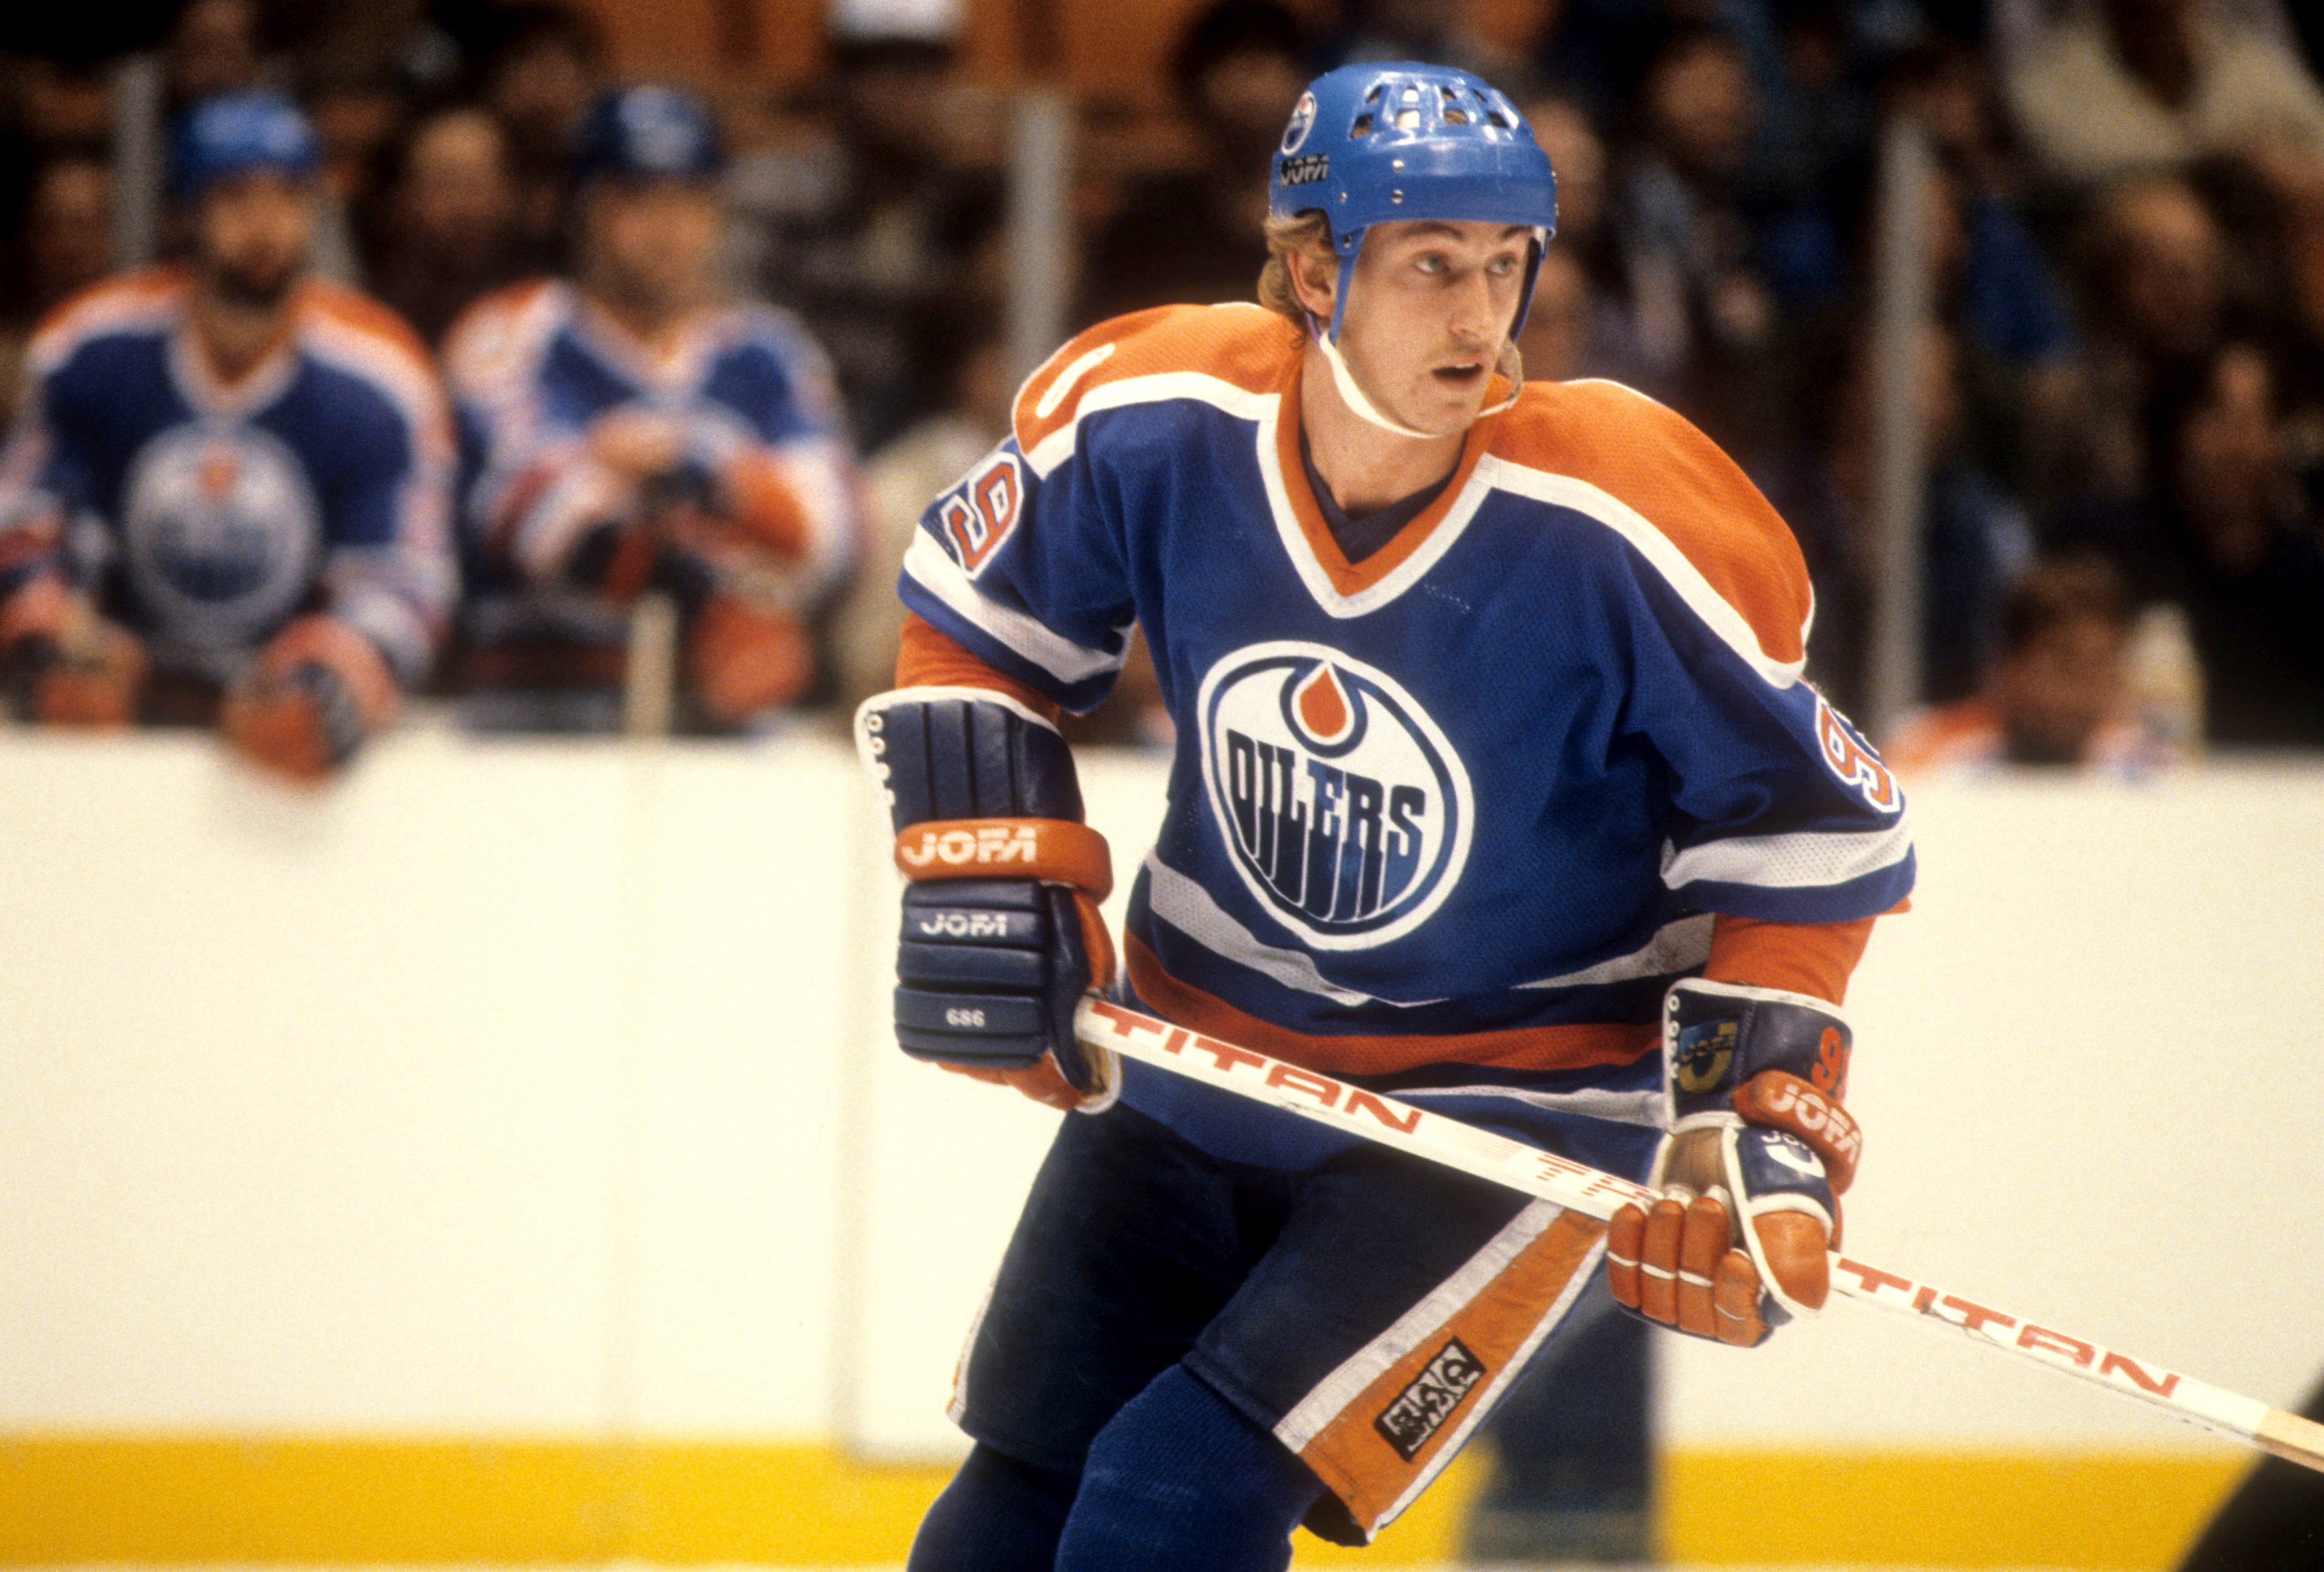 Wayne Gretzky, Biography, Stats, Facts, & Stanley Cups